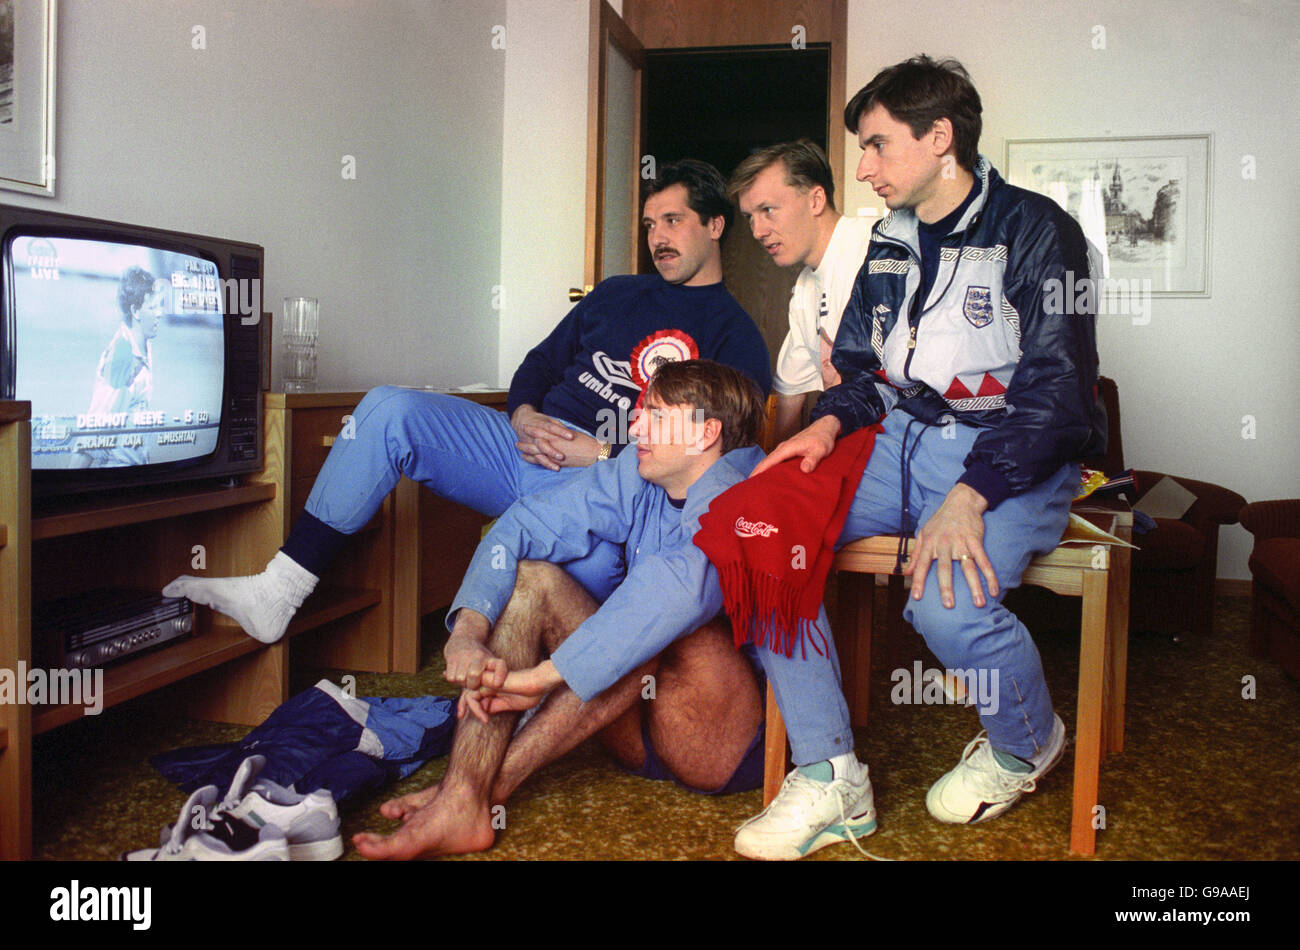 England footballers David Seaman, Paul Merson, Lee Dixon and Alan Smith watch the Cricket World Cup final between England and Pakistan on a television. Stock Photo